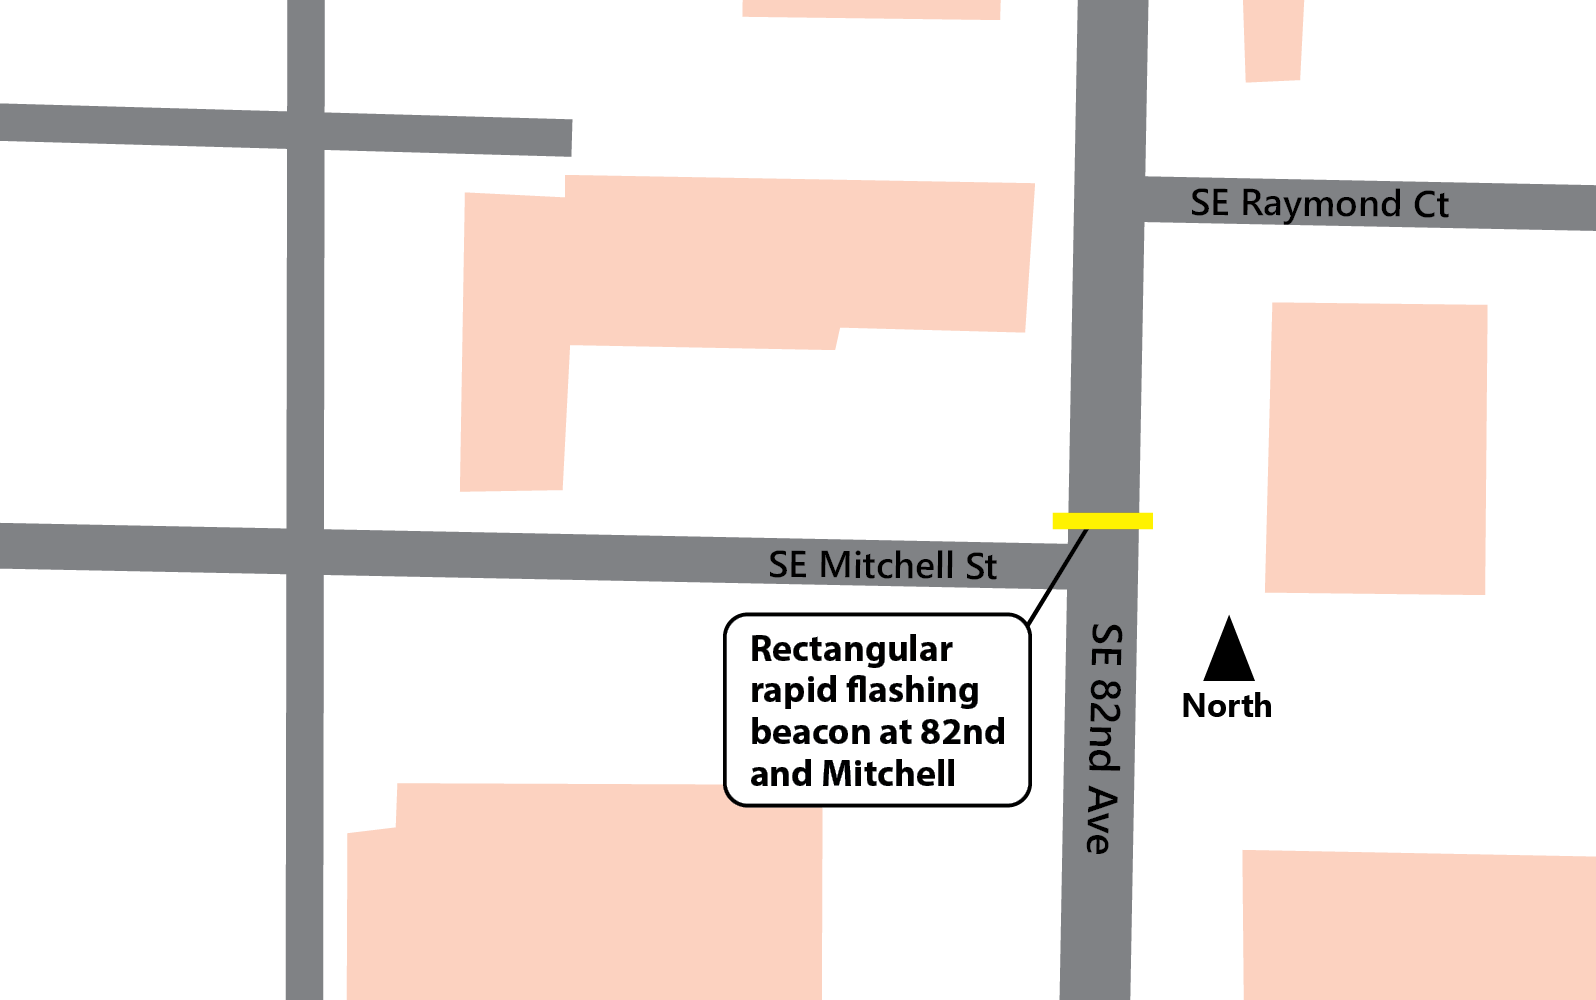 A rapid flashing beacon location shown on a map on SE 82nd Avenue at SE Mitchell Street.